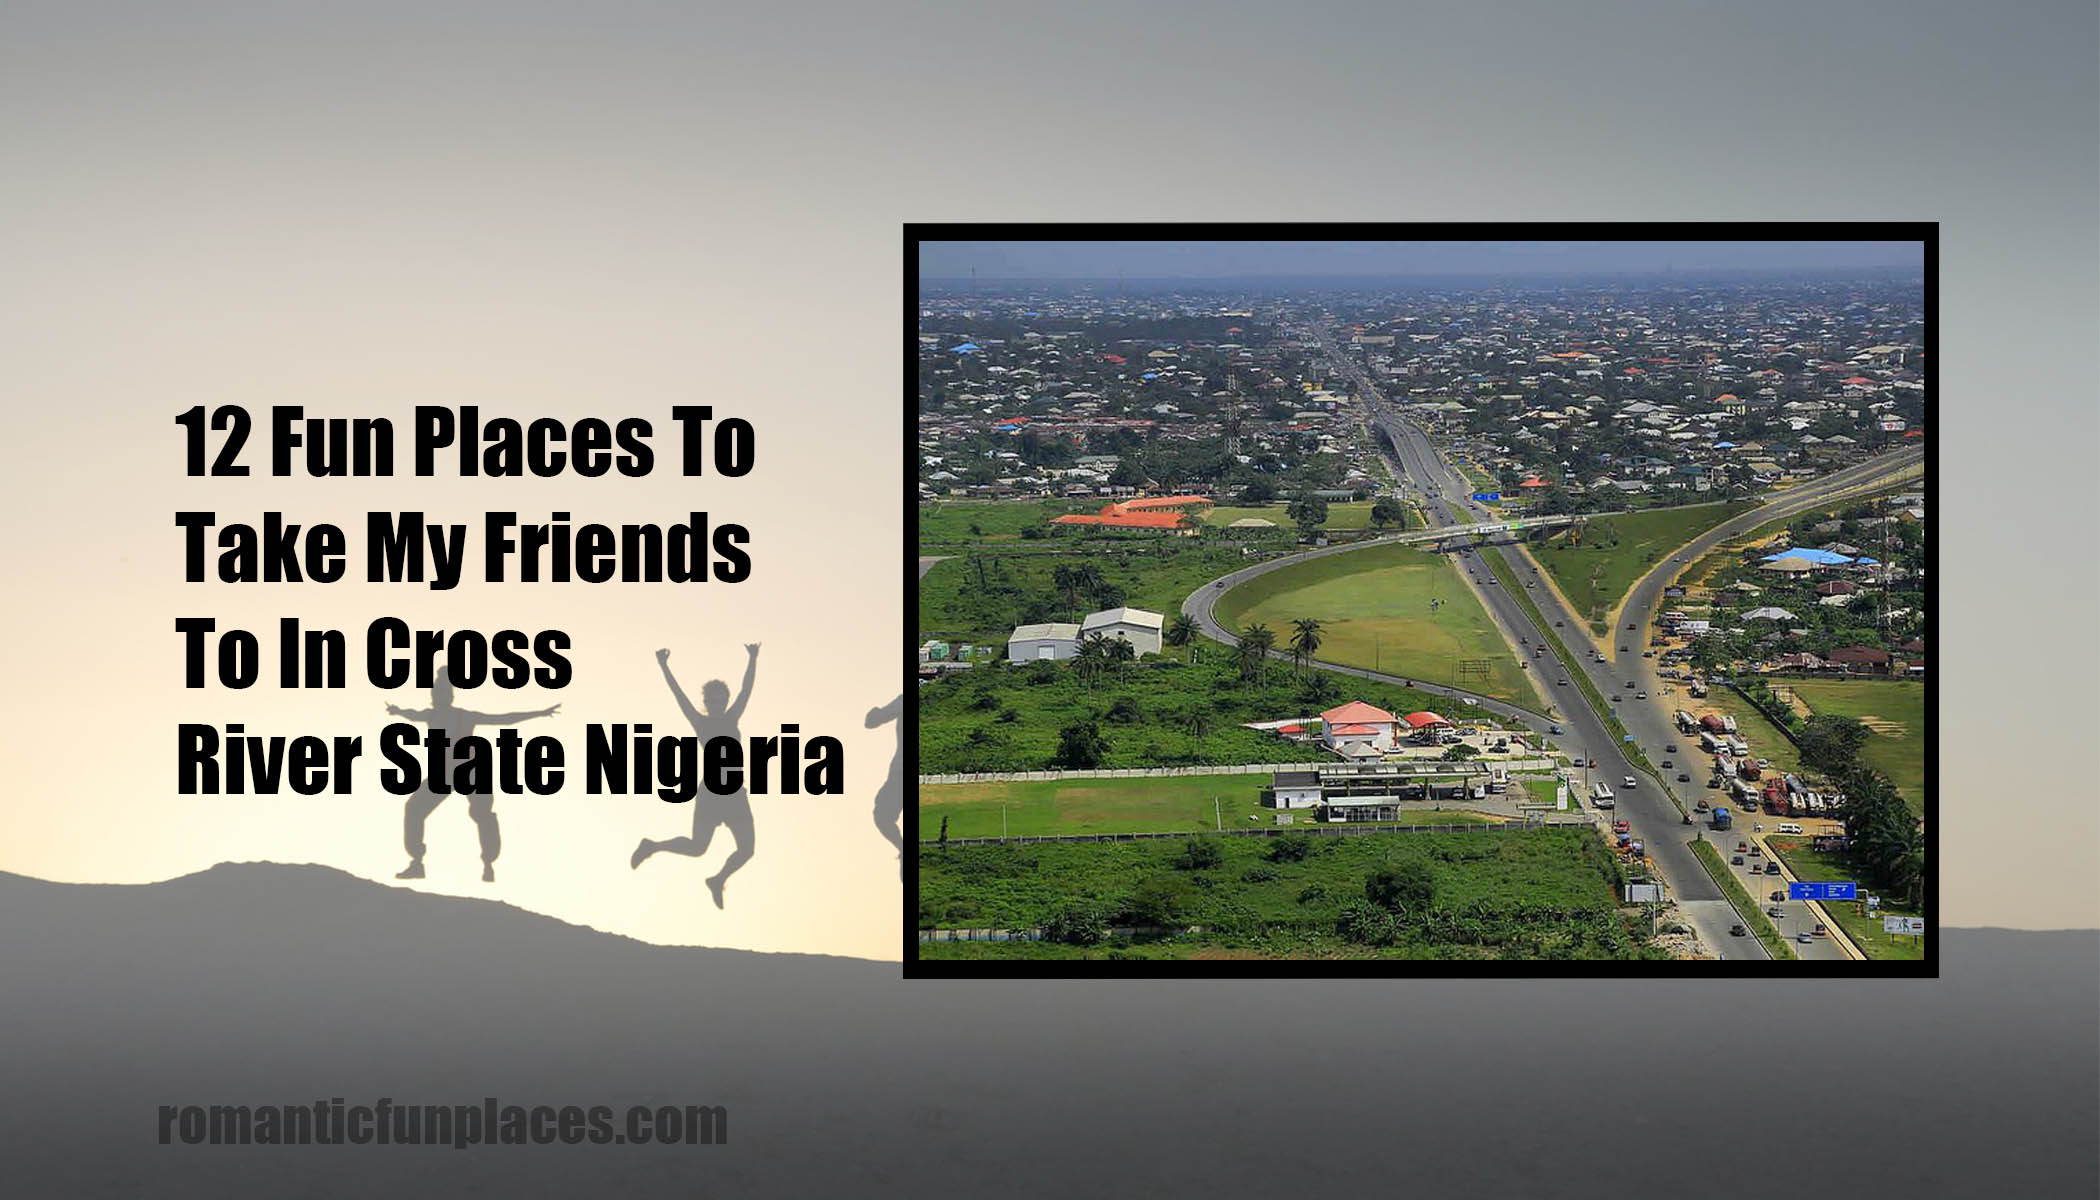 12 Fun Places To Take My Friends To In Cross River State Nigeria